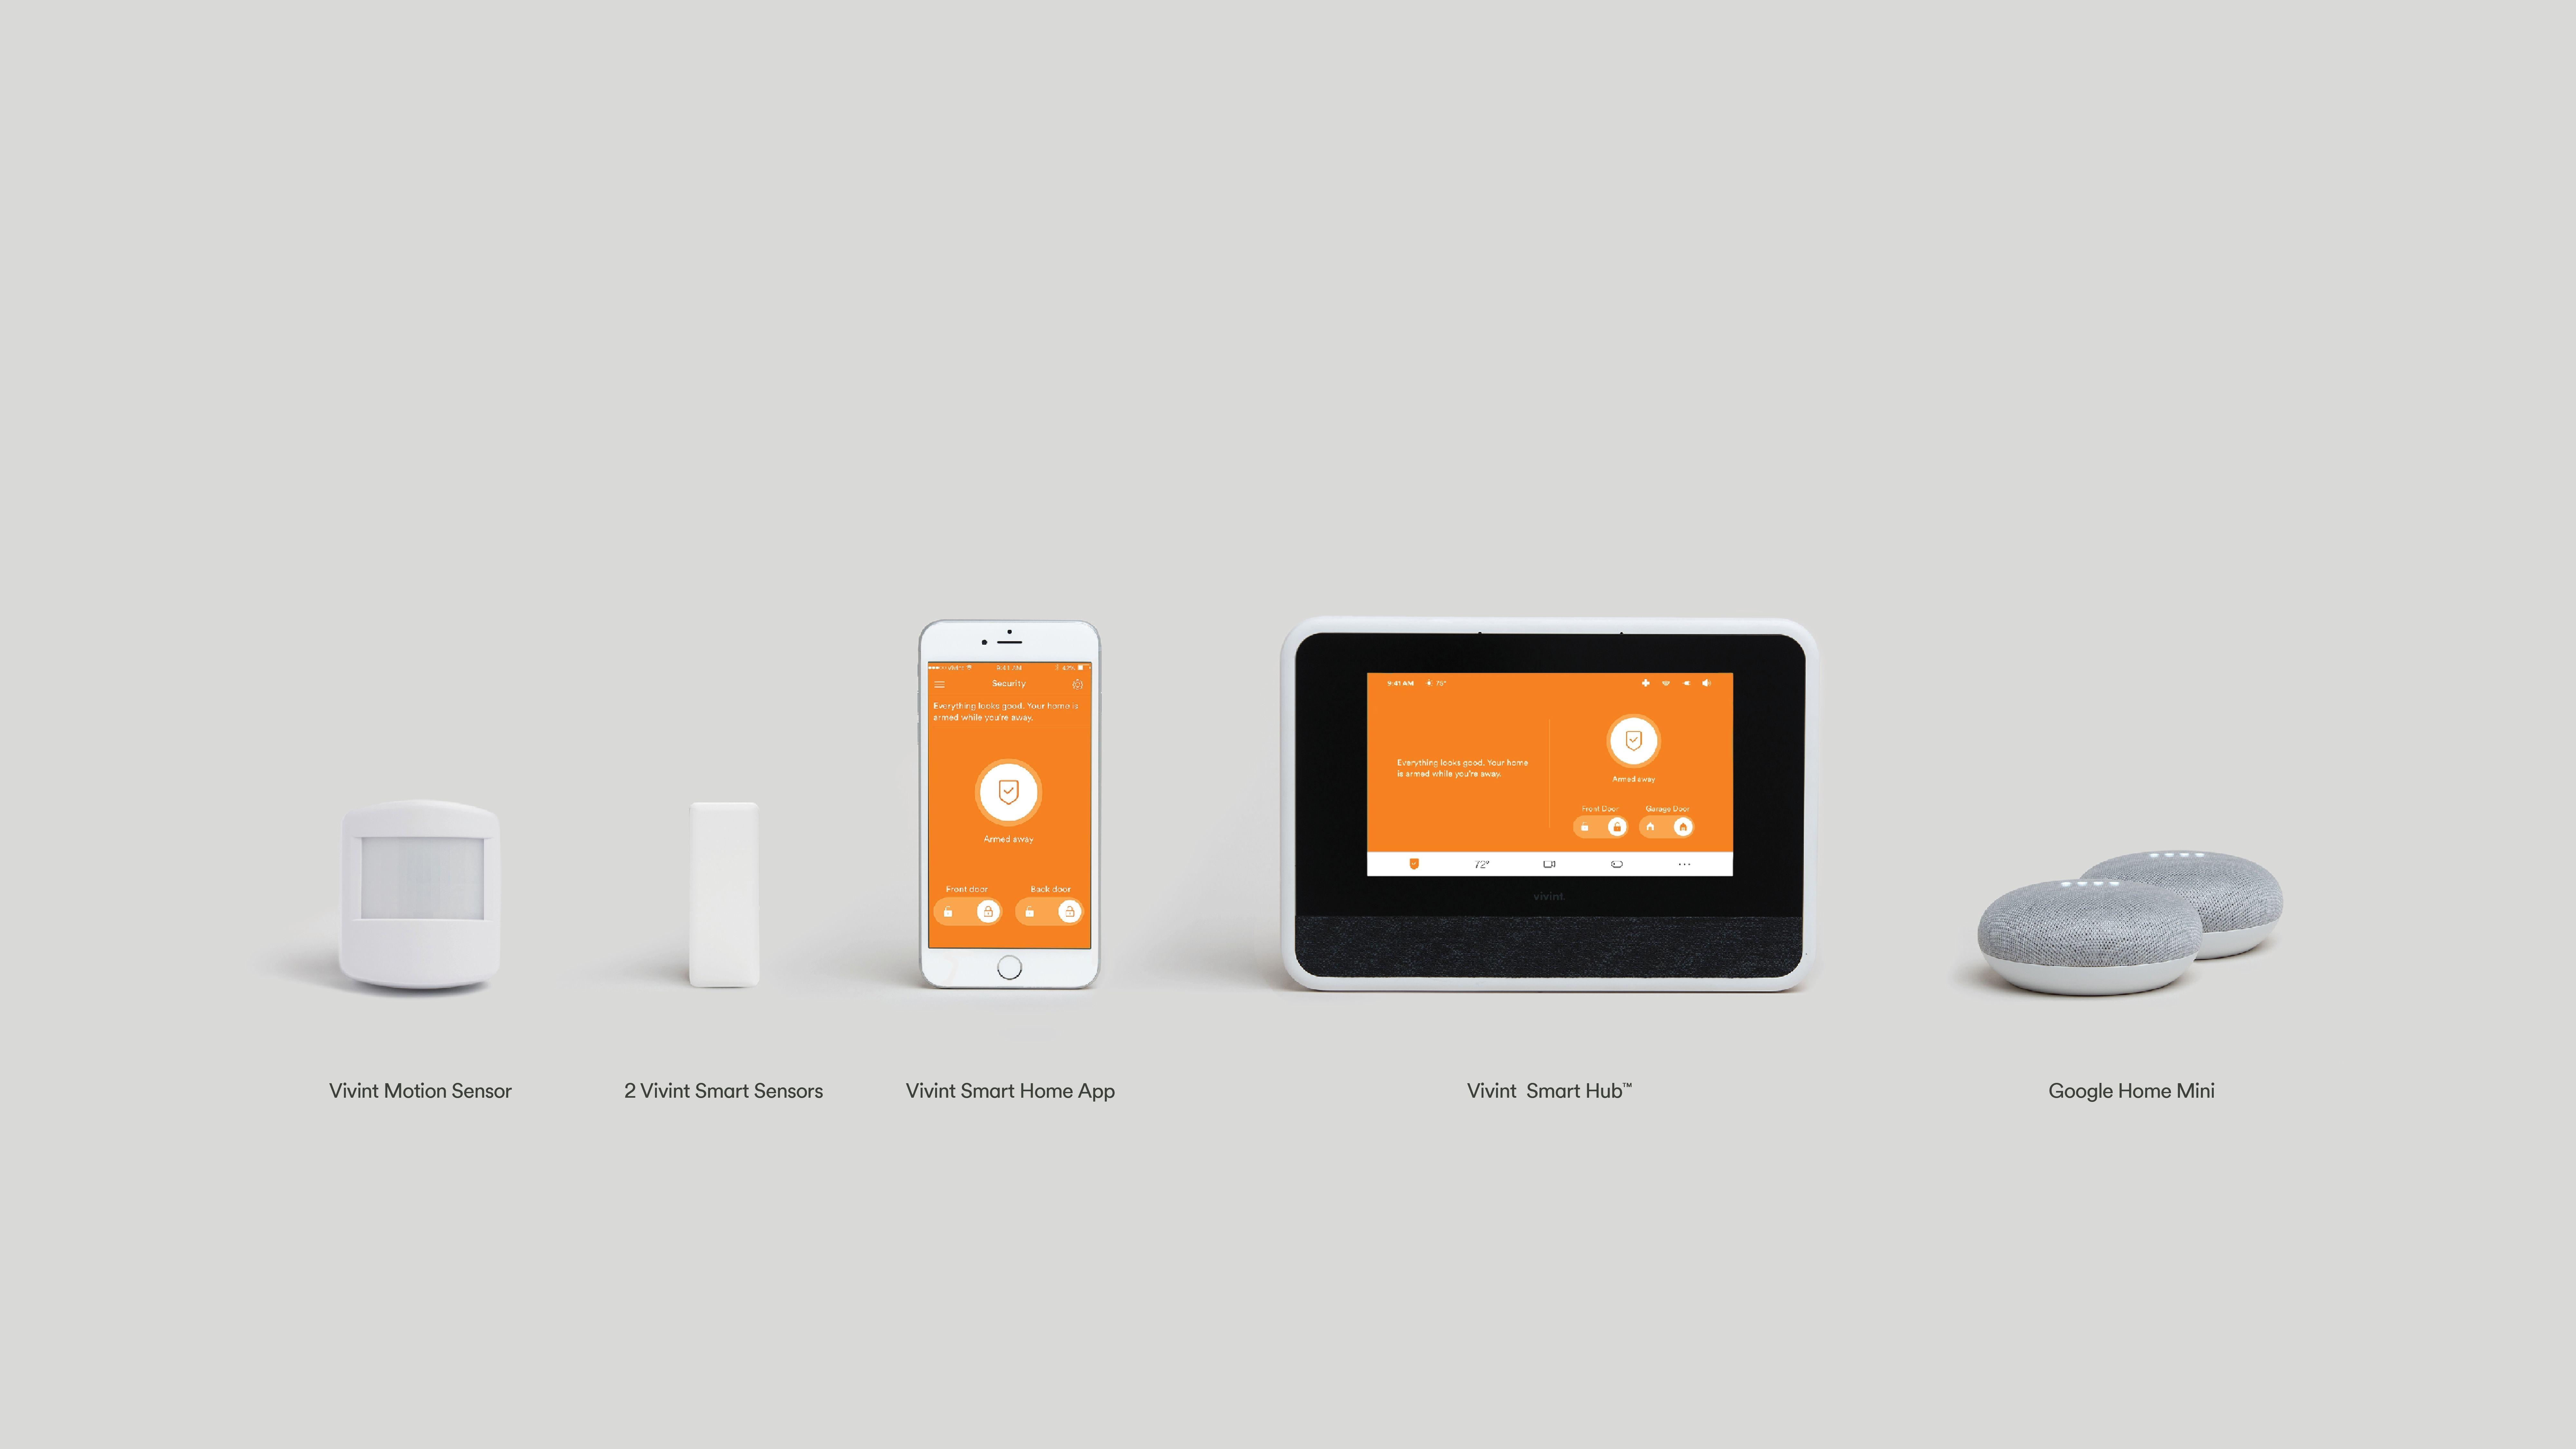 Google Voice Home Logo - Vivint Smart Home Works With Google to Give Voice Control to All New ...